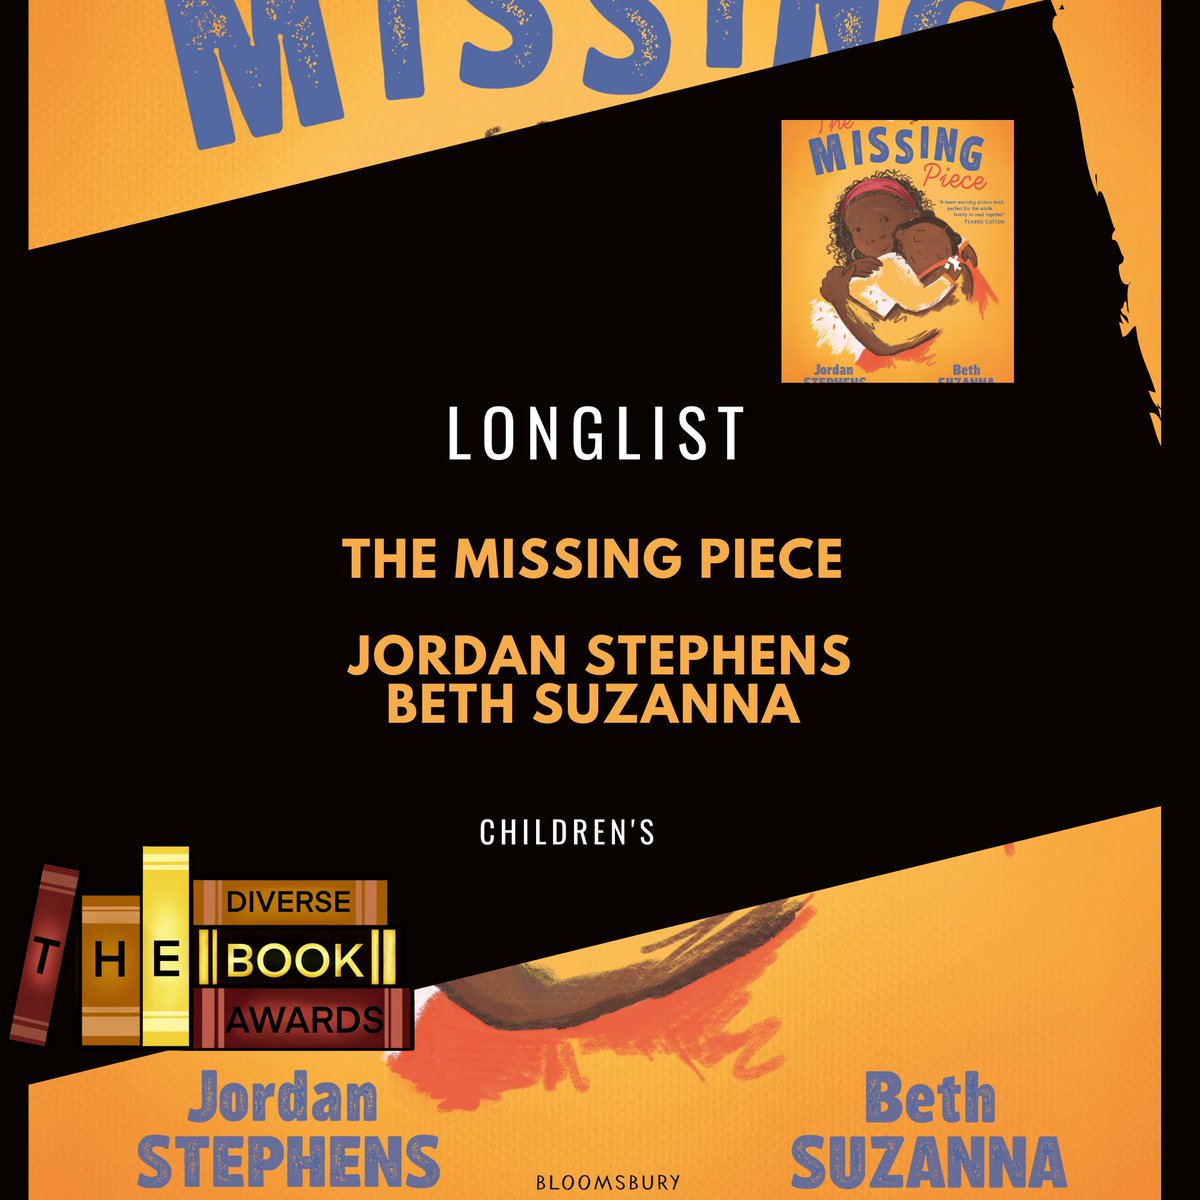 We are thrilled to have two incredible titles on @The_DBAwards incredible longlist! A huge congratulations to Mary Watson and her novel Blood to Poison, and to Jordan Stephens and Beth Suzanna and The Missing Piece! 🎉 🎉 

#TheDBAwards #diversebooks